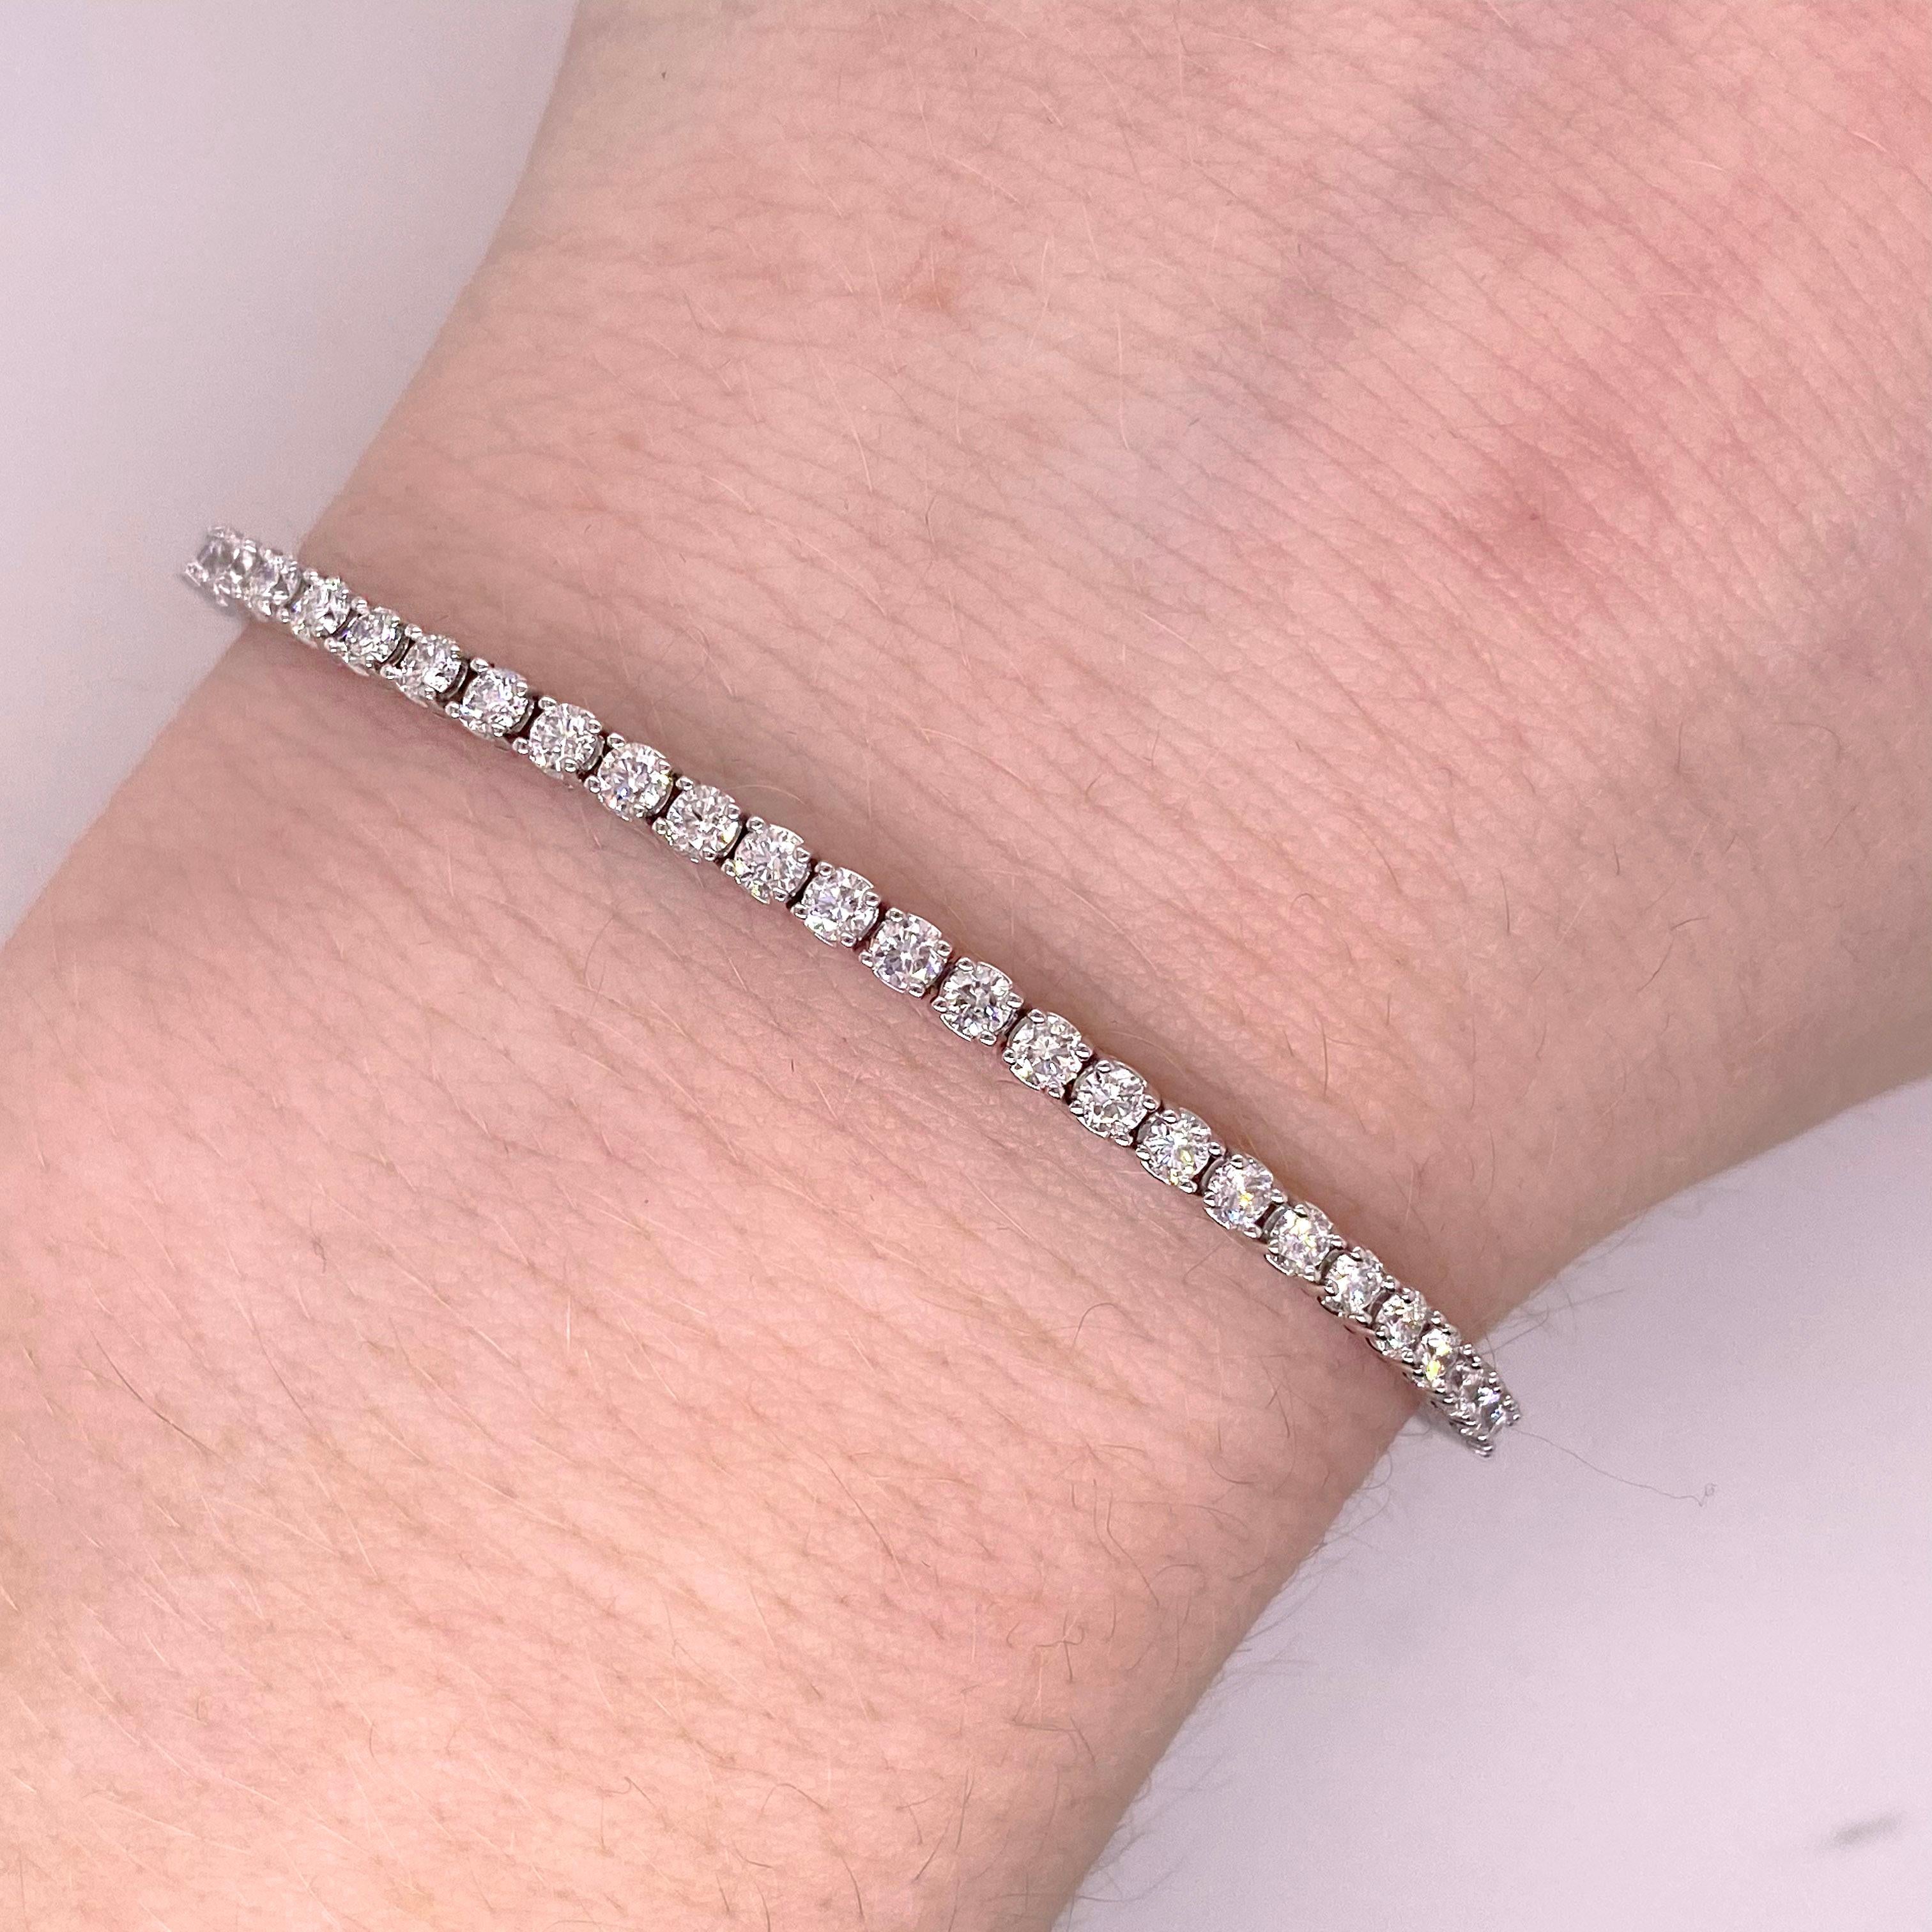 The details for this gorgeous bracelet are listed below:
Bracelet Type: Tennis
Metal Quality: 14 Karat White Gold
Diamond Number: 71
Length: 7 inches
Width: 2.53 millimeters
Clasp: Hidden with an Underneath Safety Latch
Diamond Shape: Round
Total